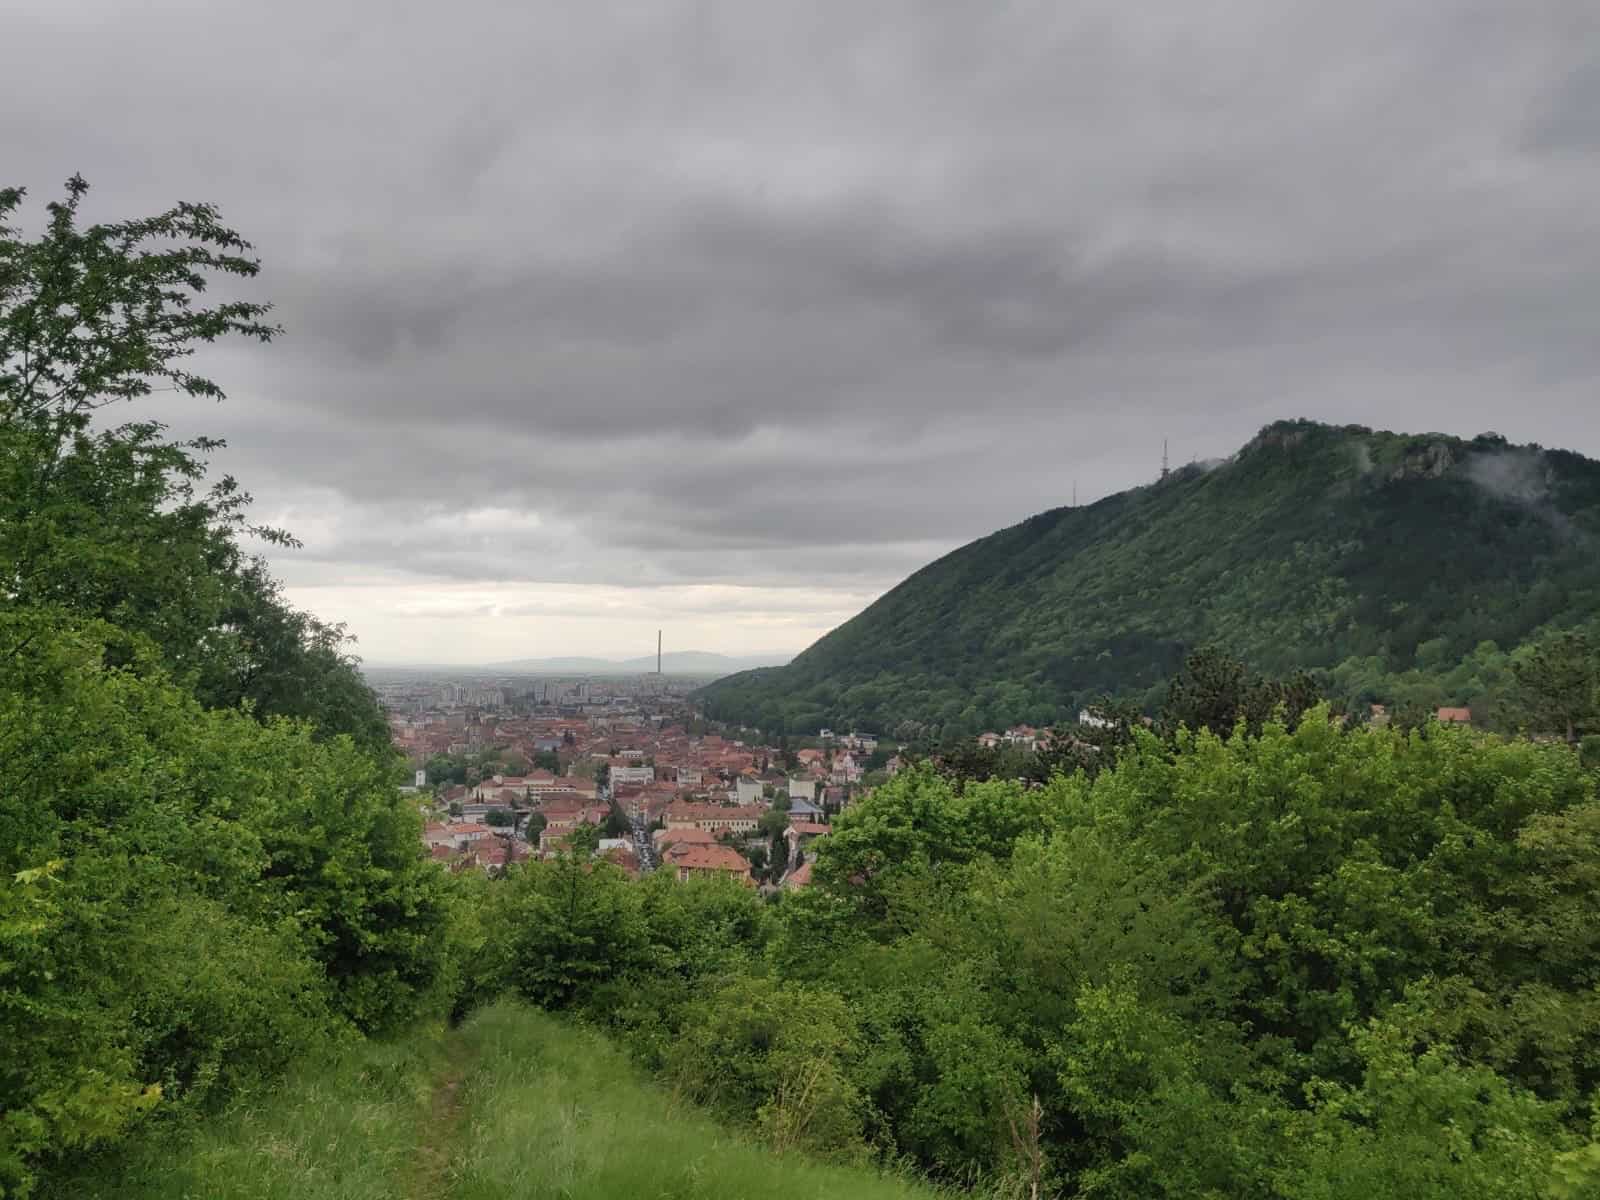 The view from above Brașov that morning